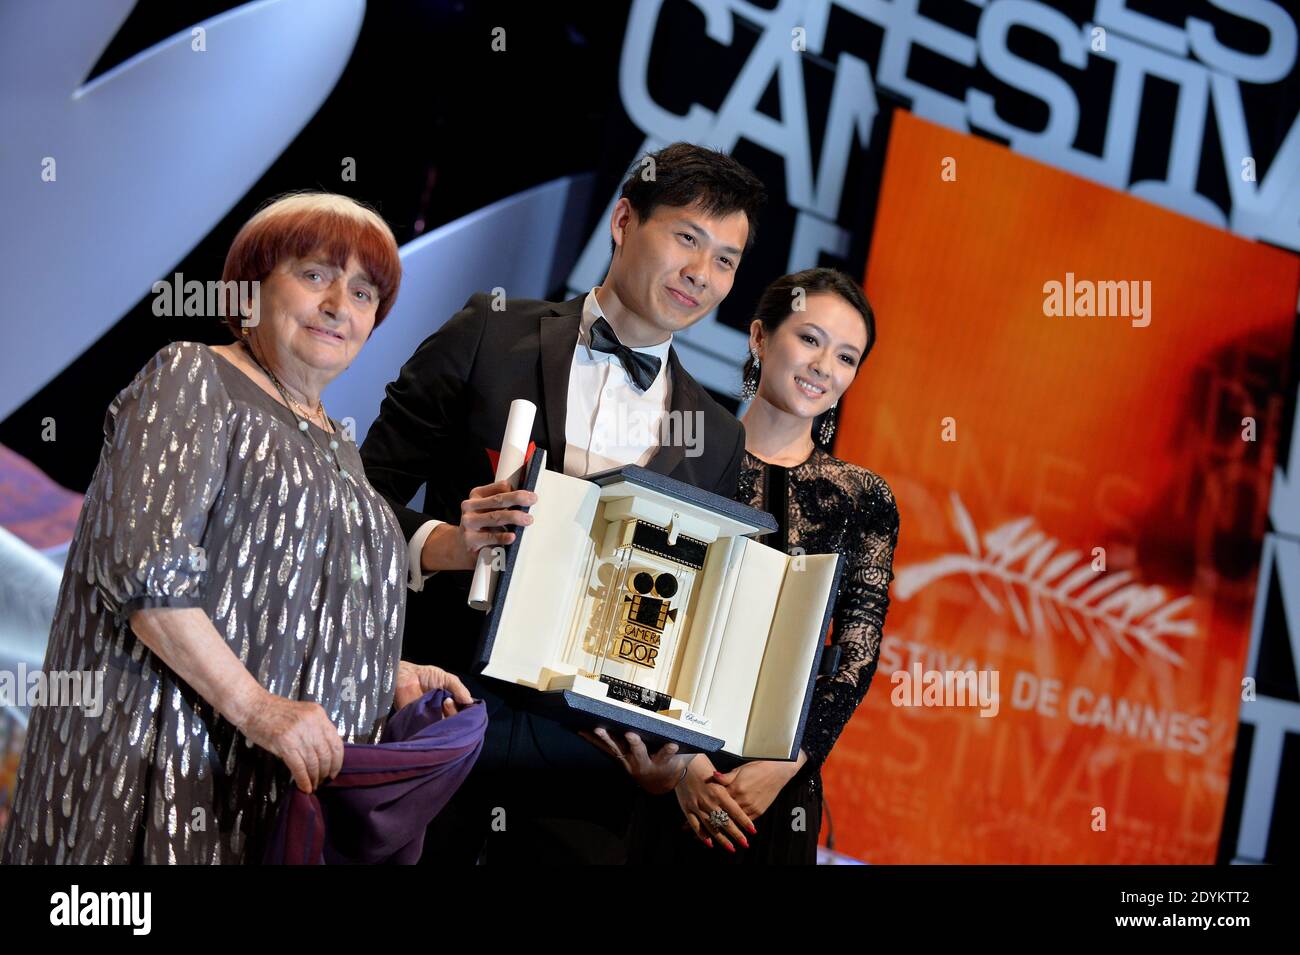 Singaporean director Anthony Chen (C) poses on stage with director Agnes Varda and Chinese actress and member of the Un Certain Regard Jury Zhang Ziyi at the Inside closing ceremony during the 66th Annual Cannes Film Festival at the Palais des Festivals in Cannes, France on May 26, 2013. Photo by Lionel Hahn/ABACAPRESS.COM Stock Photo